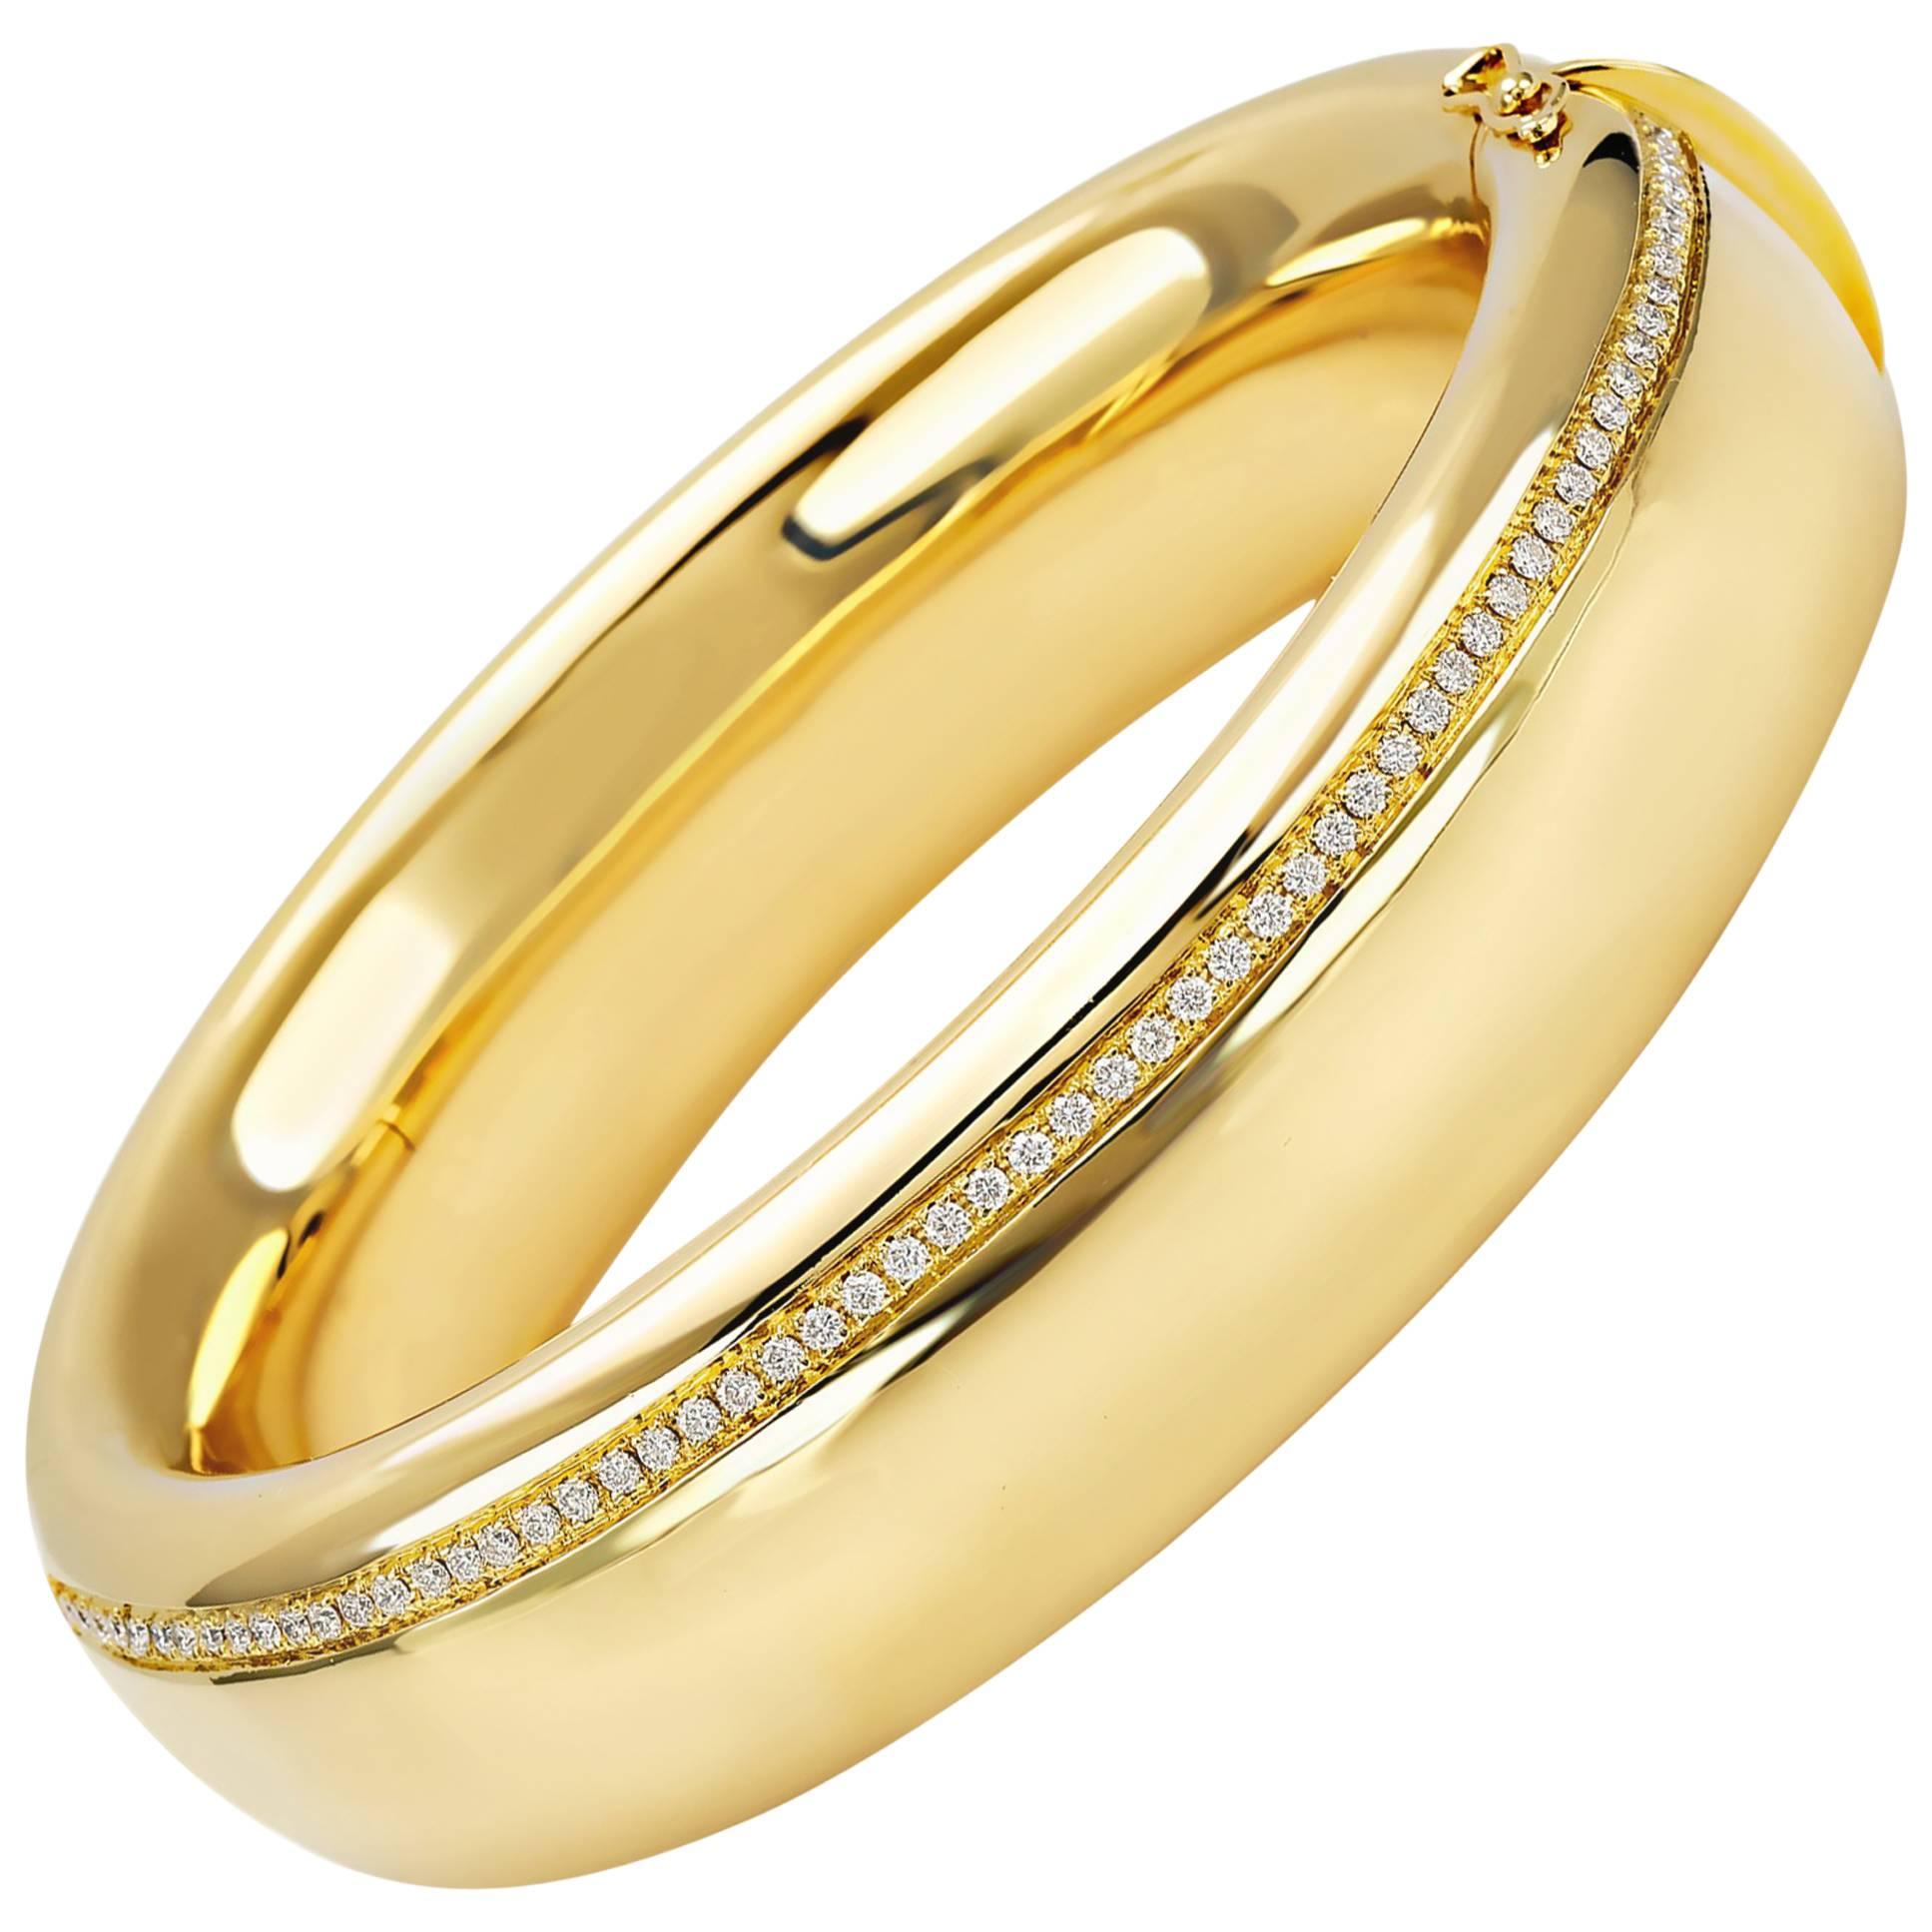 Bangle from the Collection "Essence" 18 Karat Yellow Gold and Diamonds For Sale